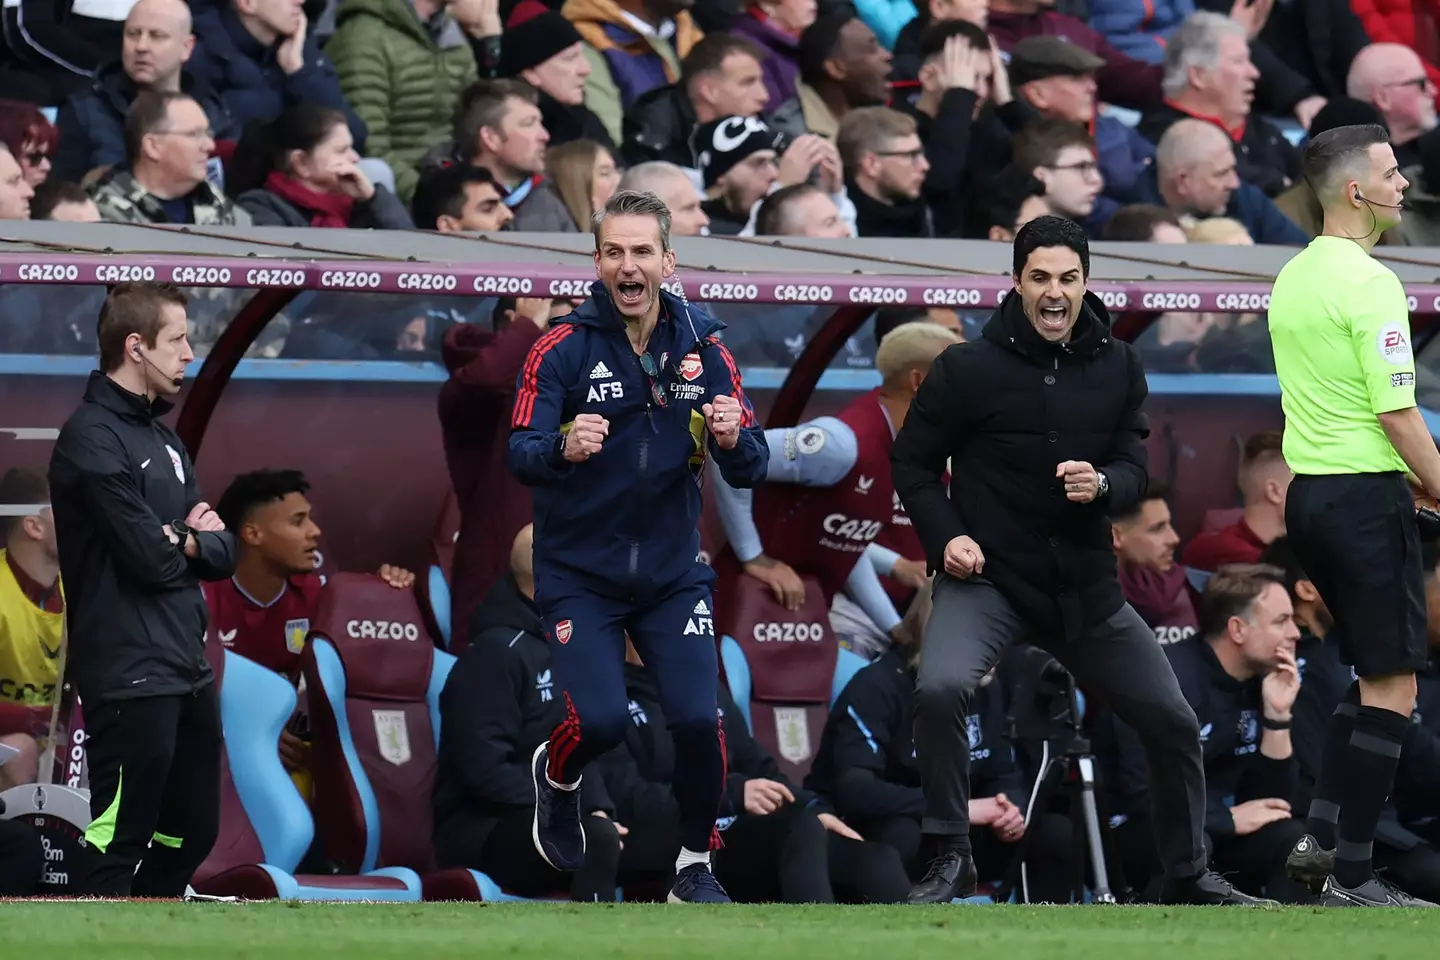 The Arsenal bench celebrate a huge win over Aston Villa. Image: Alamy